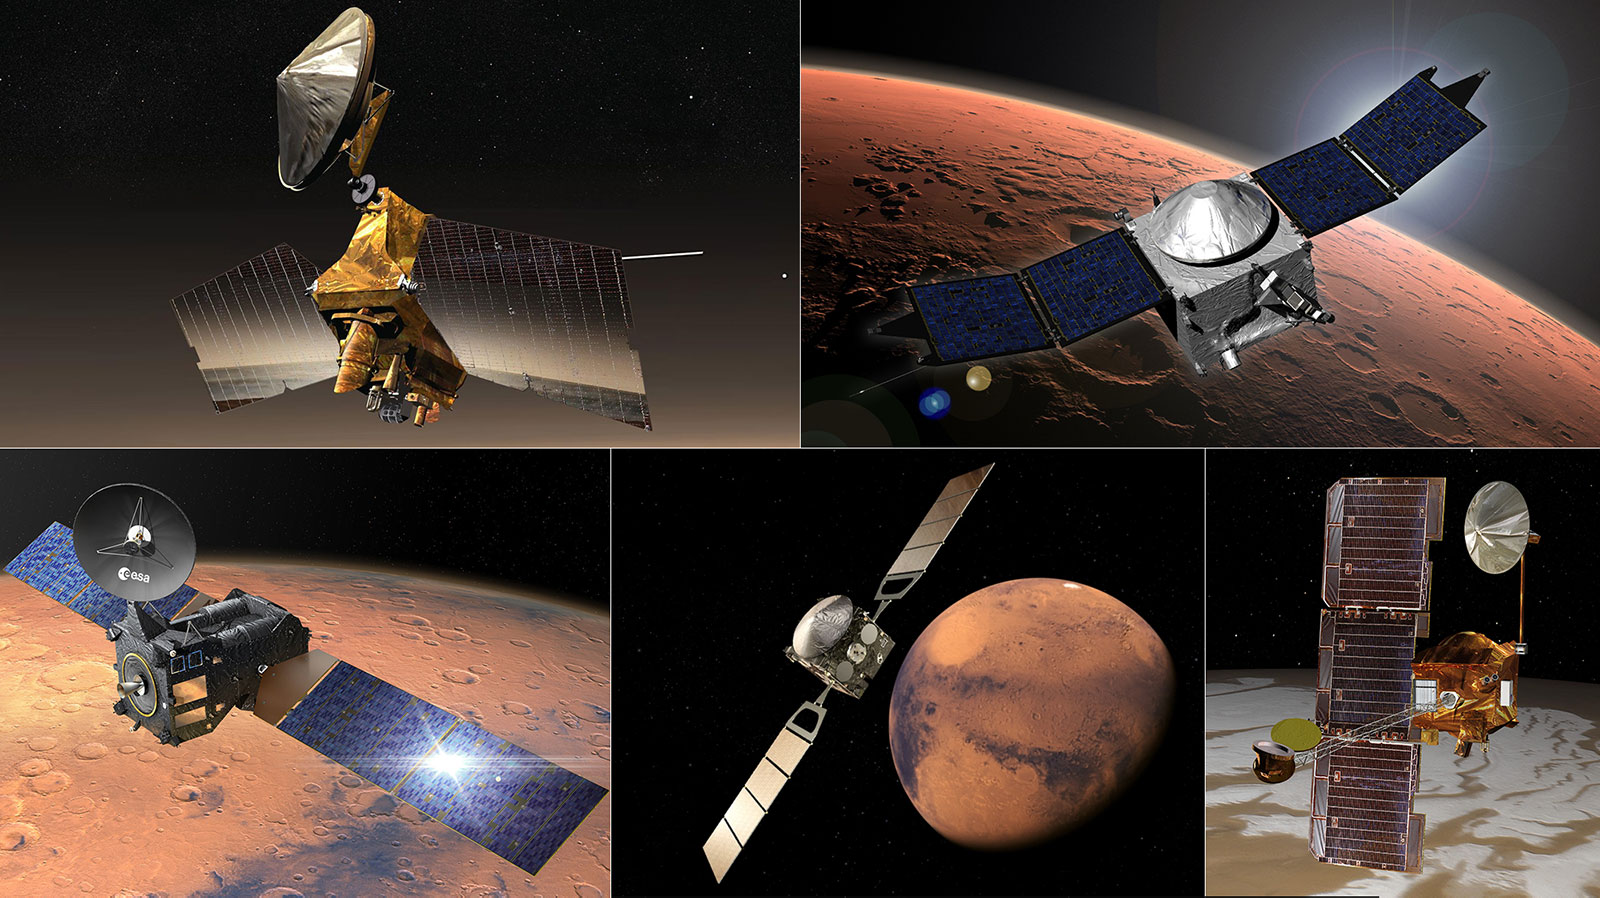 Five spacecraft currently in orbit about the Red Planet make up the Mars Relay Network to transmit commands from Earth to surface missions and receive science data back from them.